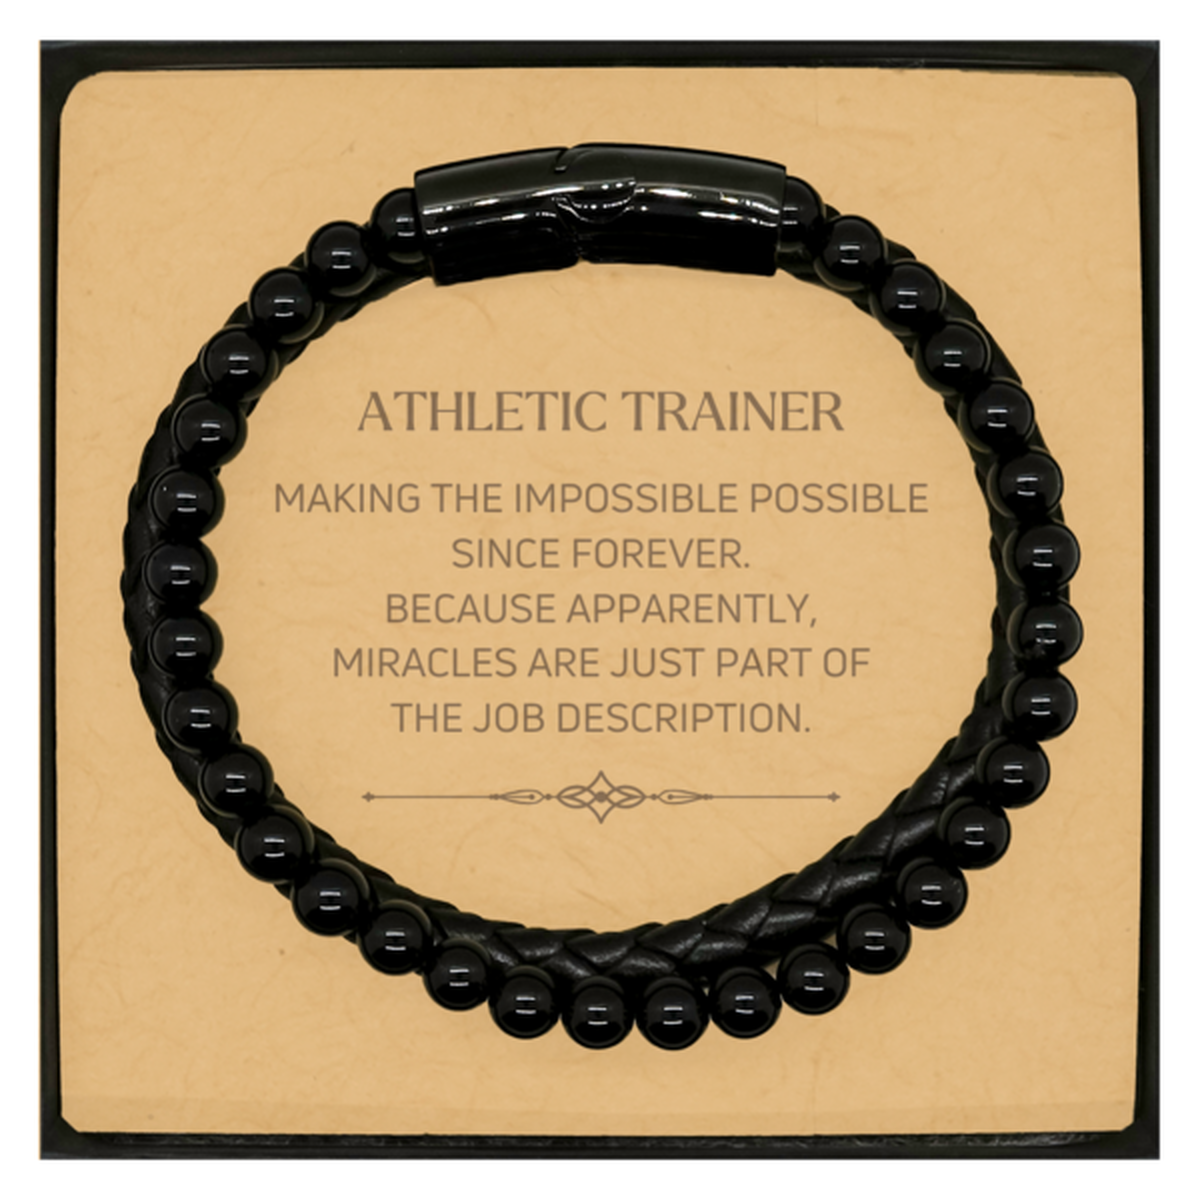 Funny Athletic Trainer Gifts, Miracles are just part of the job description, Inspirational Birthday Christmas Stone Leather Bracelets For Athletic Trainer, Men, Women, Coworkers, Friends, Boss